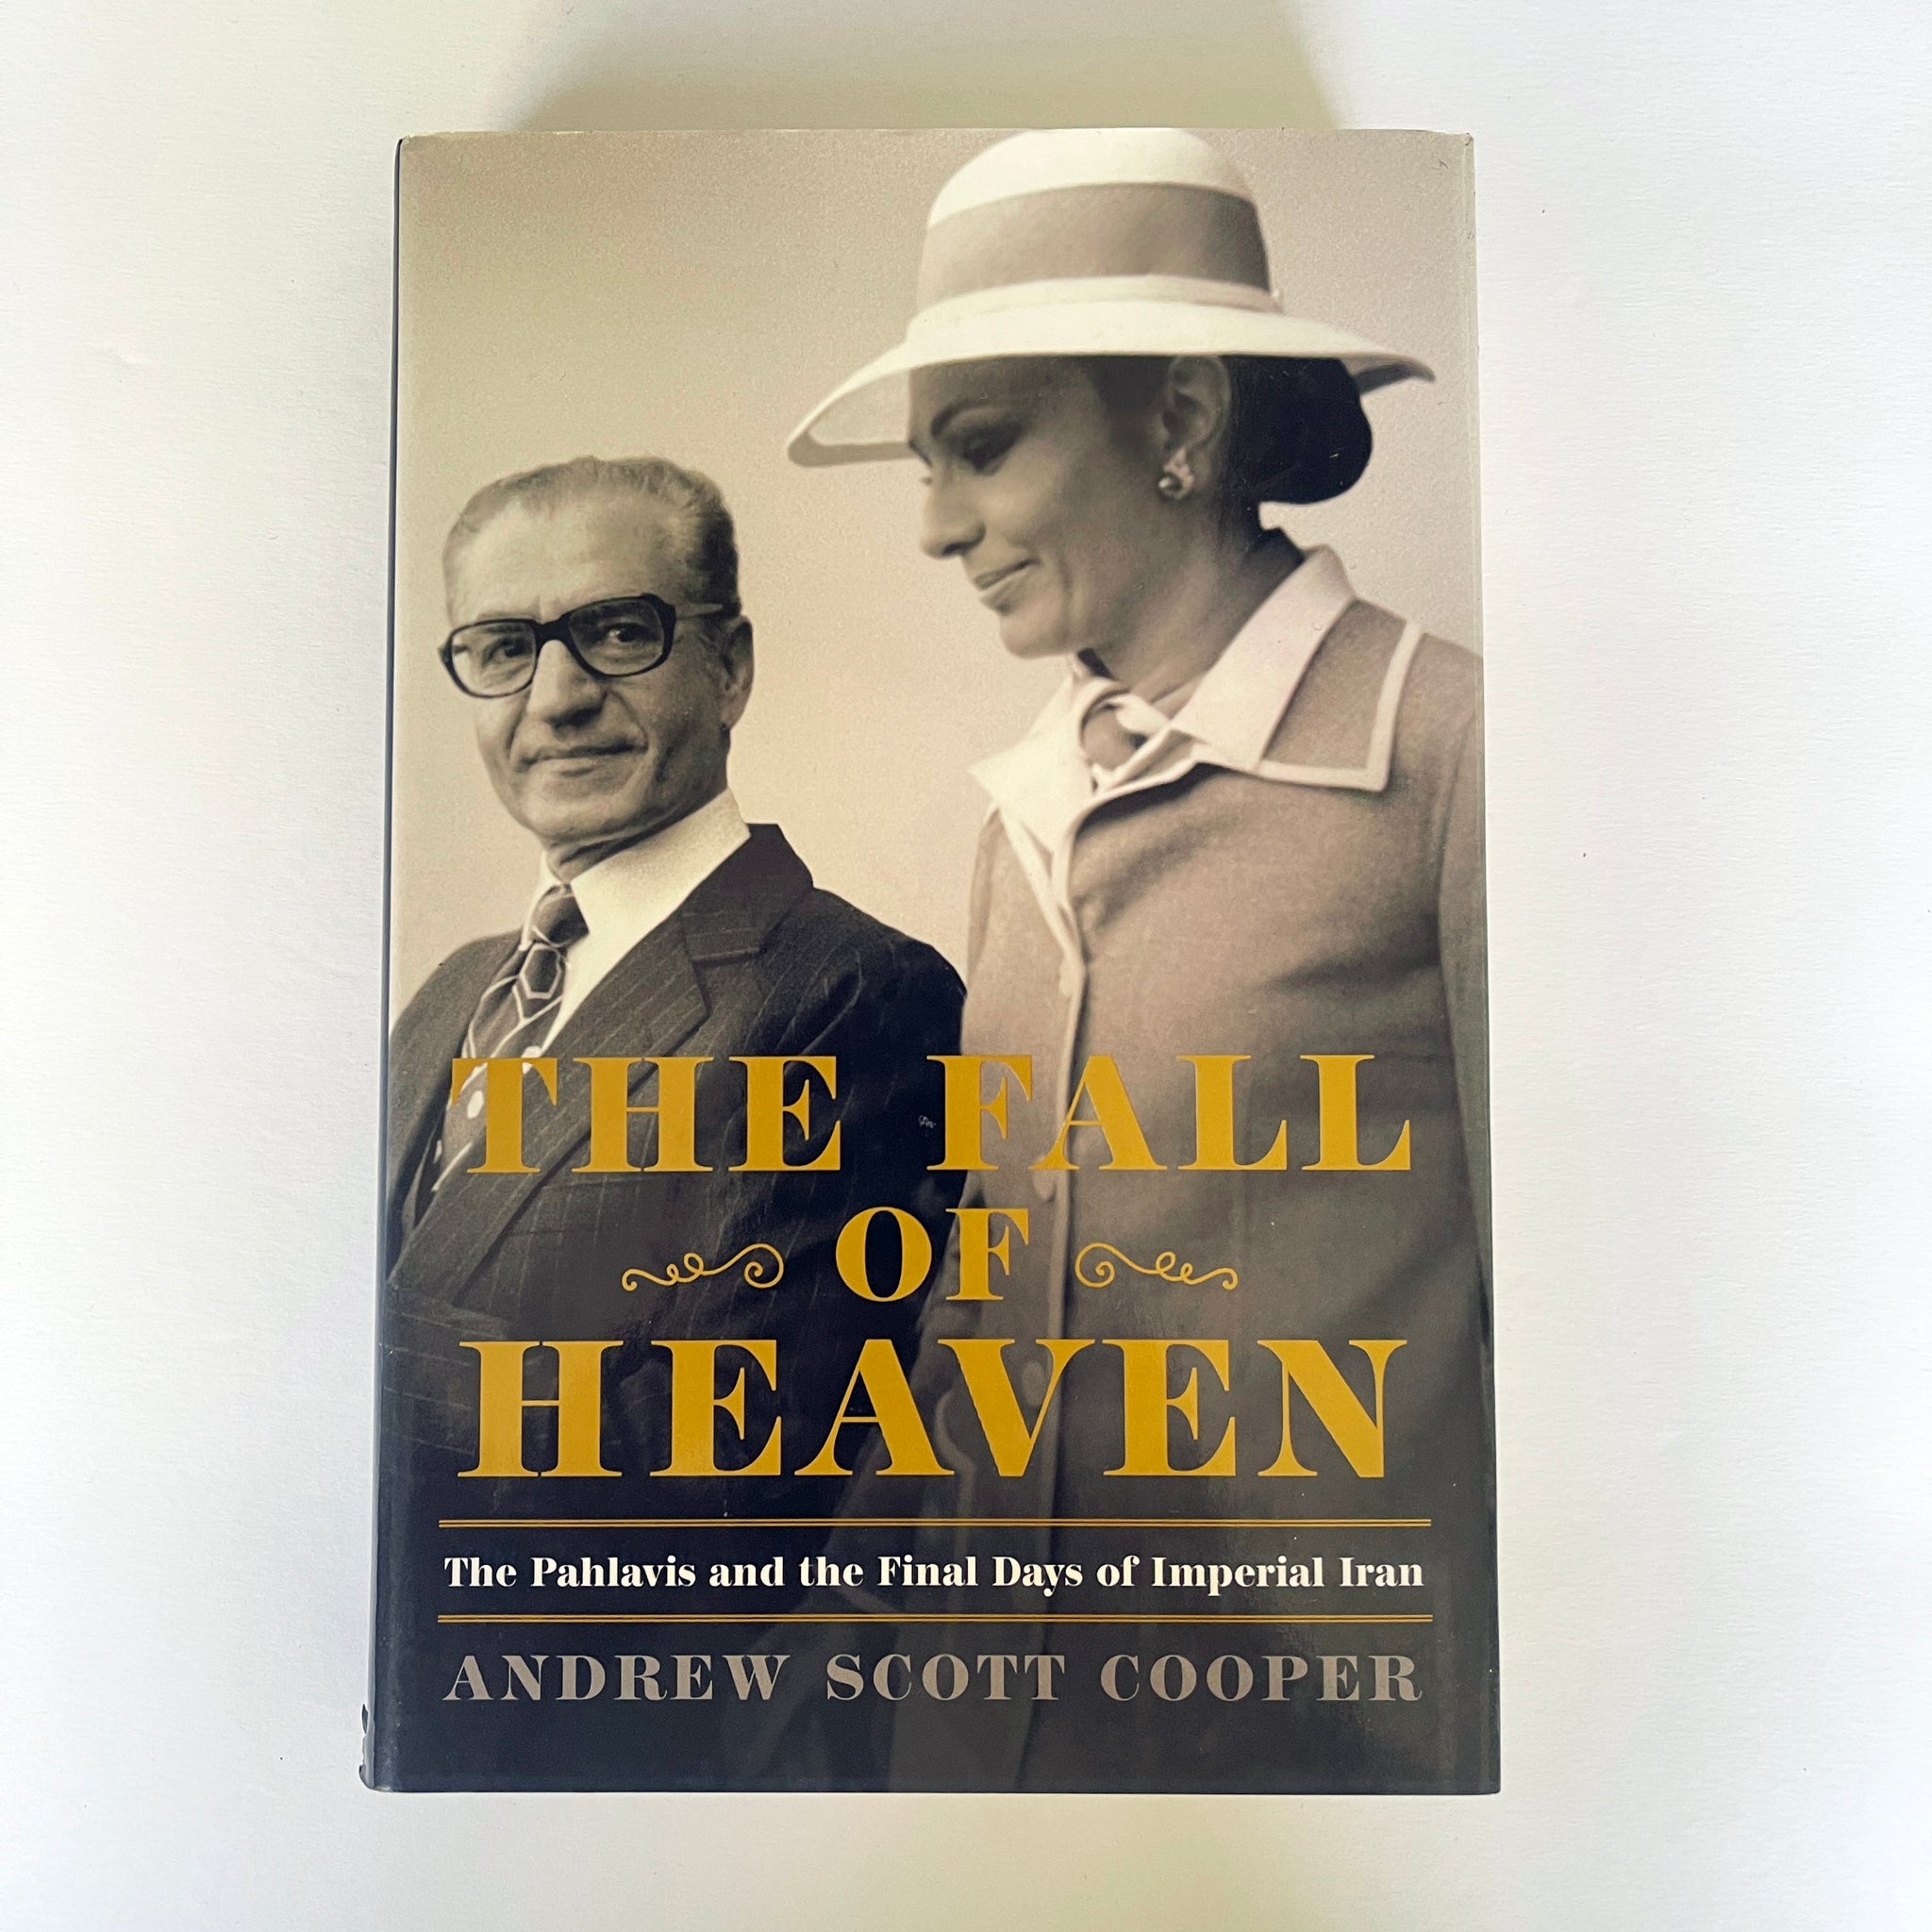 The Fall of Heaven - The Pahlavis & the Final Days of Imperial Iran - by Andrew Scott Cooper